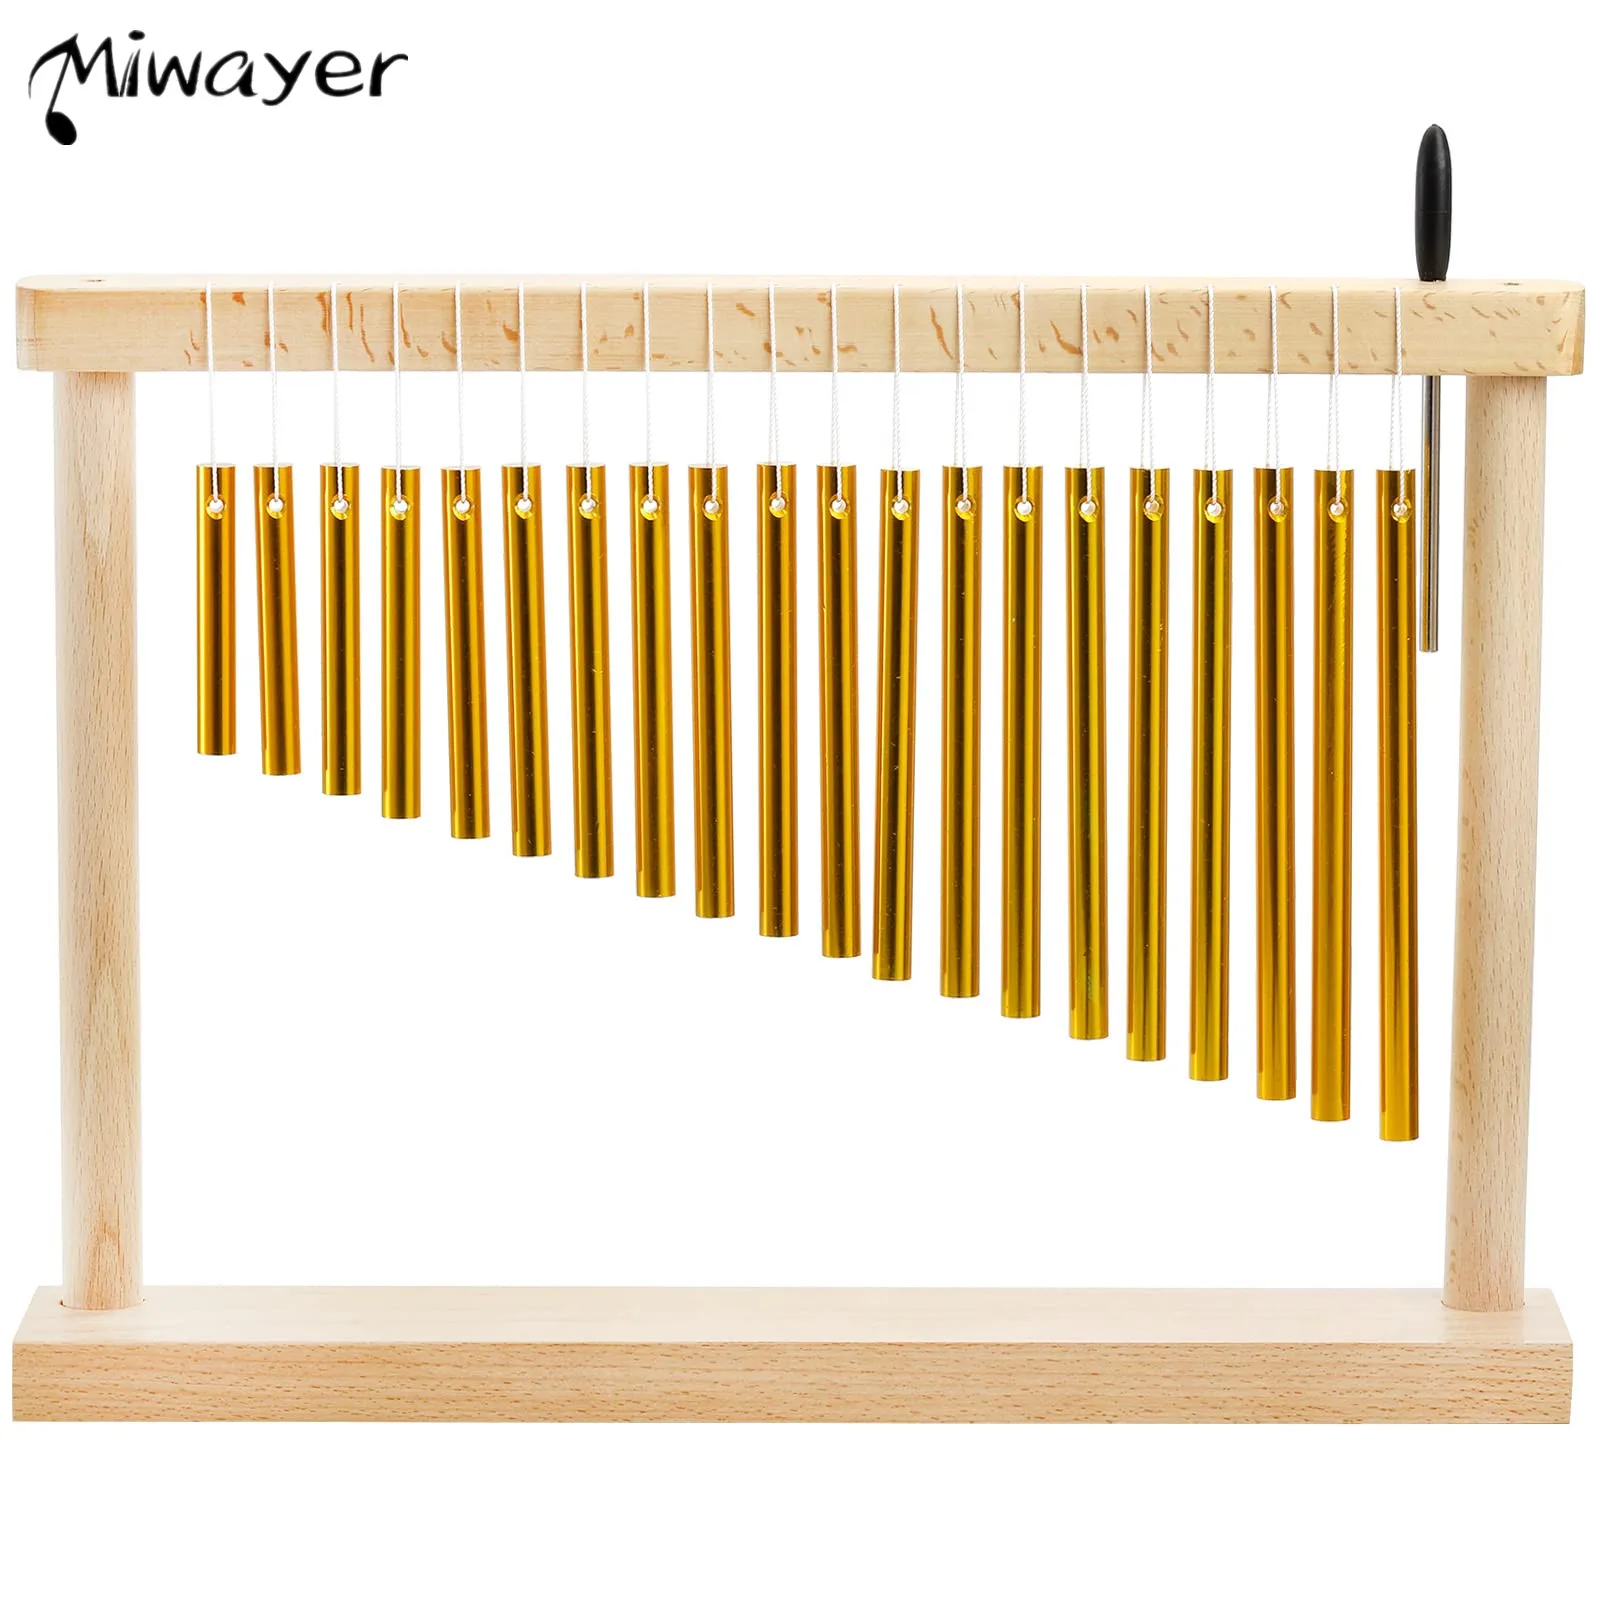 

Miwayer 20-NOTE Bar Chime, Single-row Table Top Wind Chime, 20 Bars Musical Percussion Instrument with Mallet